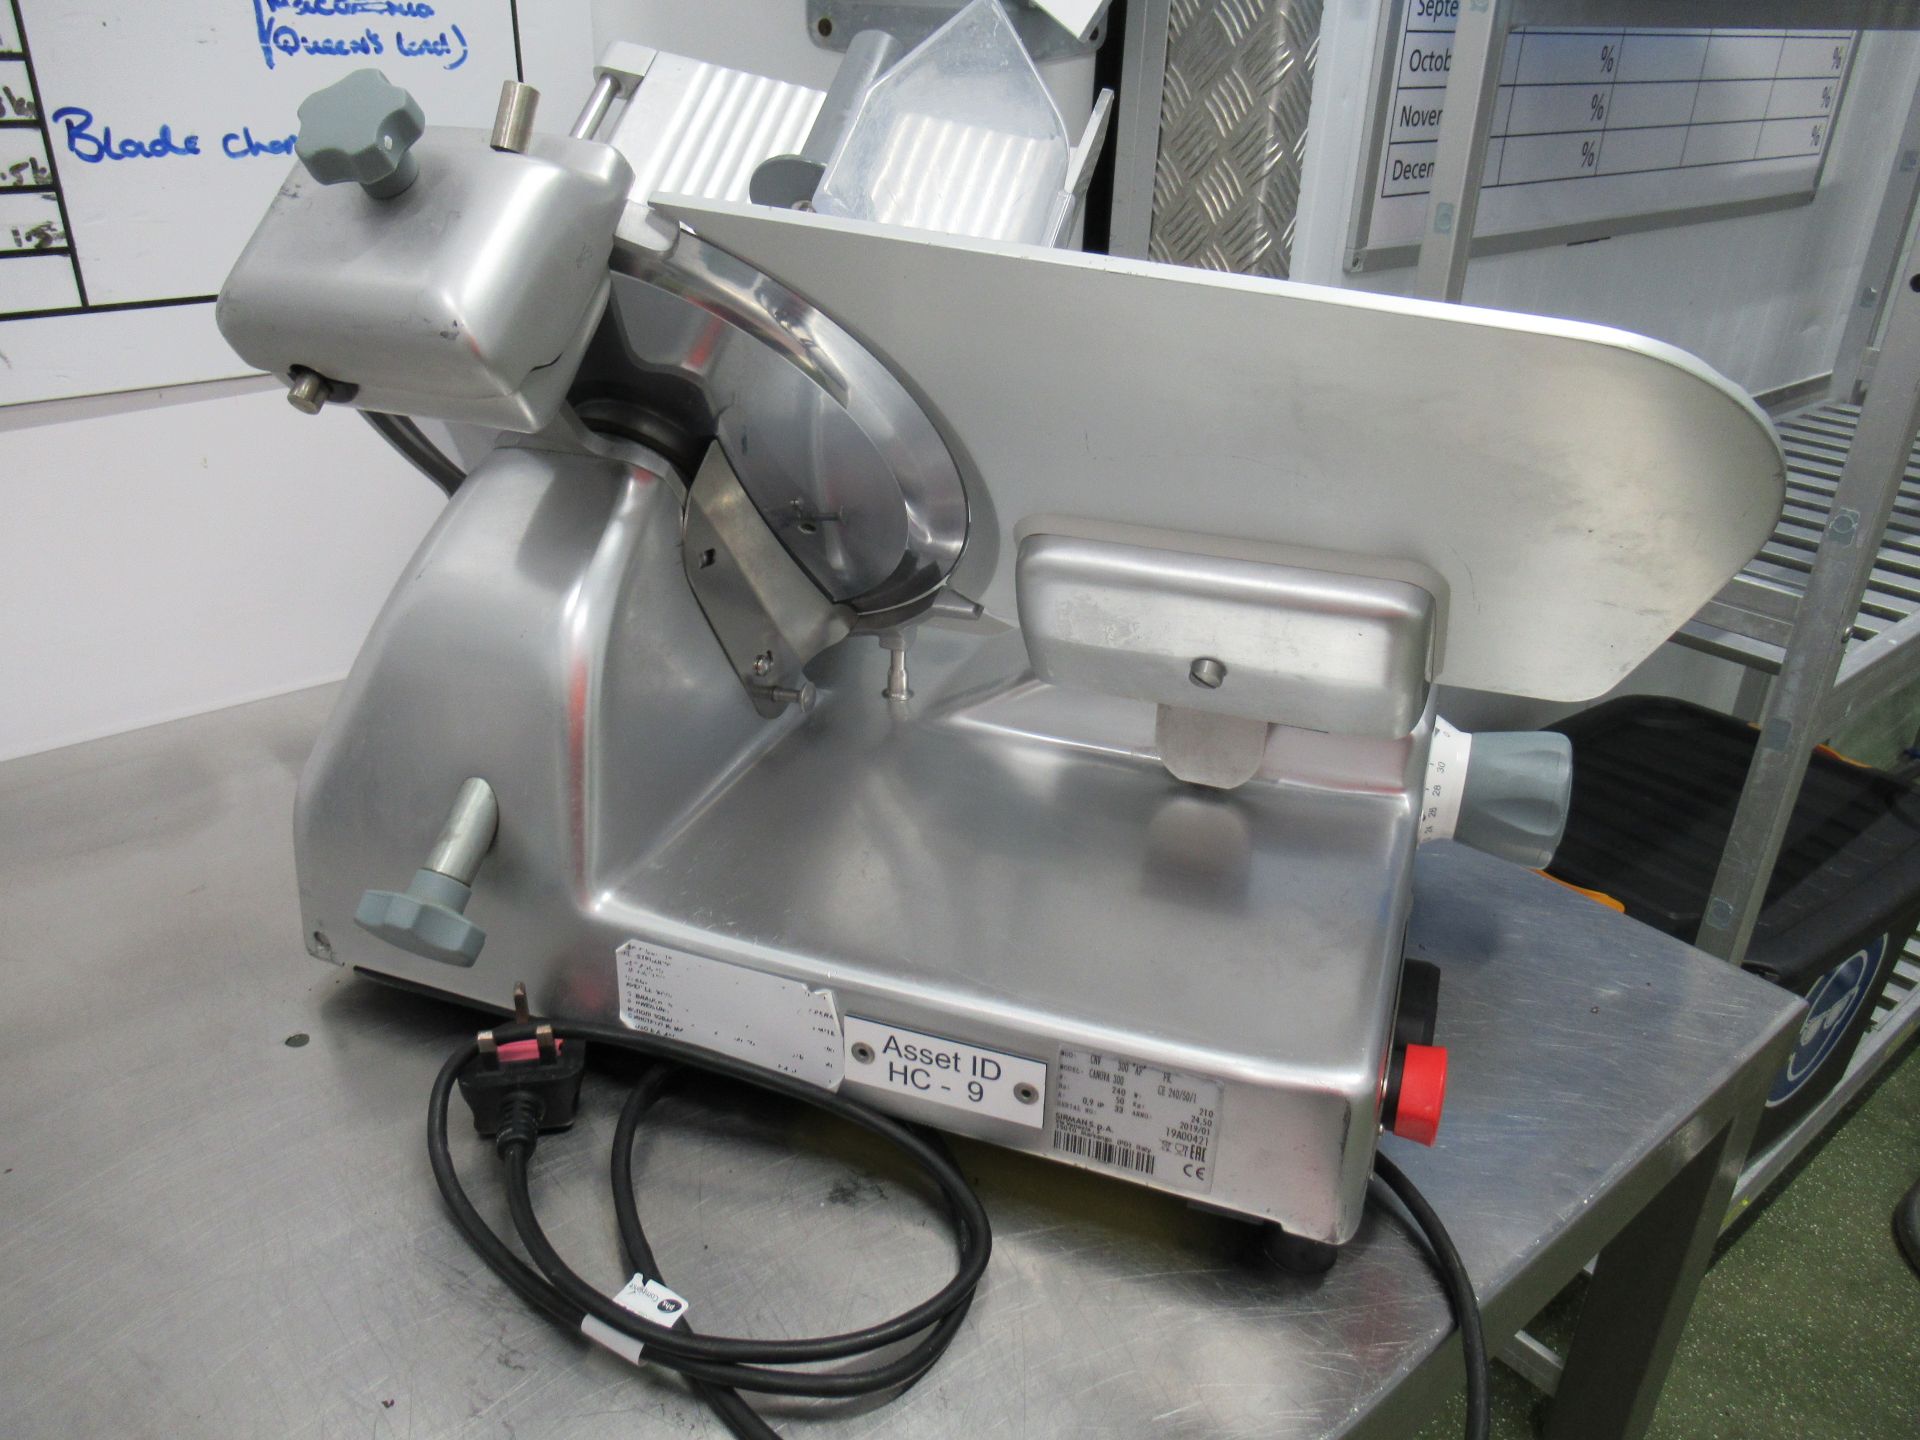 Sirman Canova 300 meat slicer, manual, bench top, Serial no: 19A00421, blade diameter 300mm - Image 4 of 6